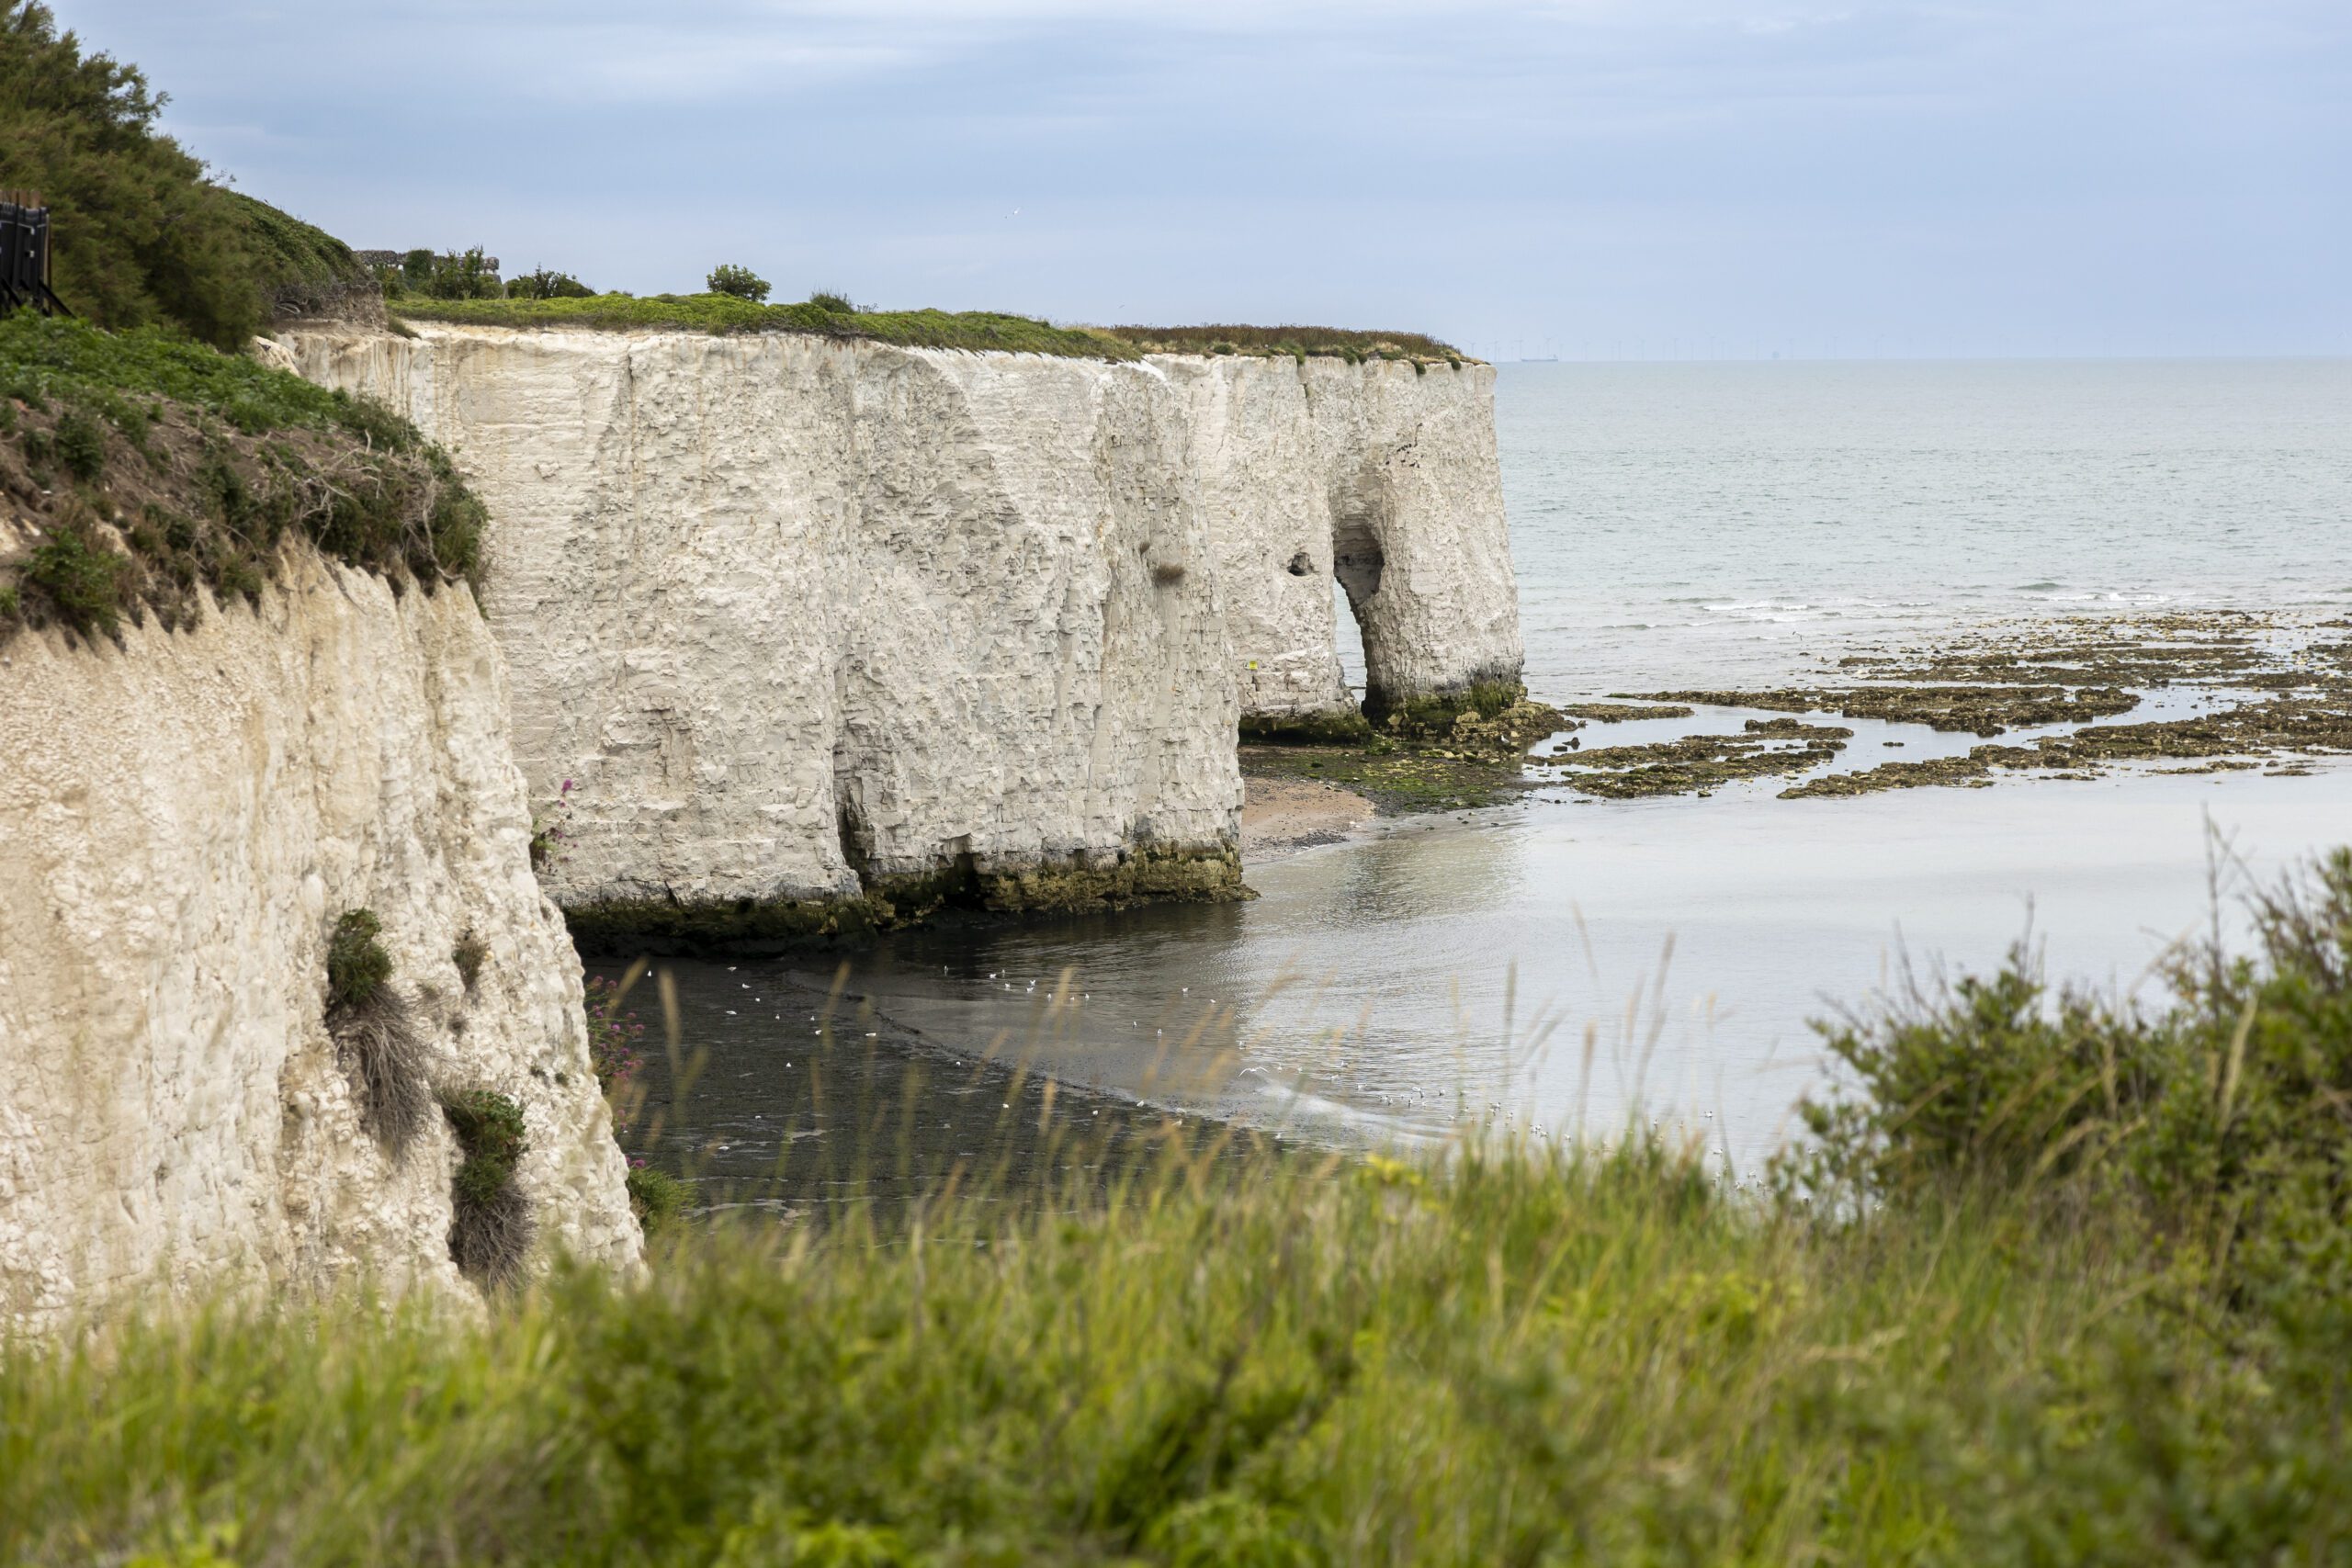 View of the chalk arch in the cliffs at Kingsgate Bay.